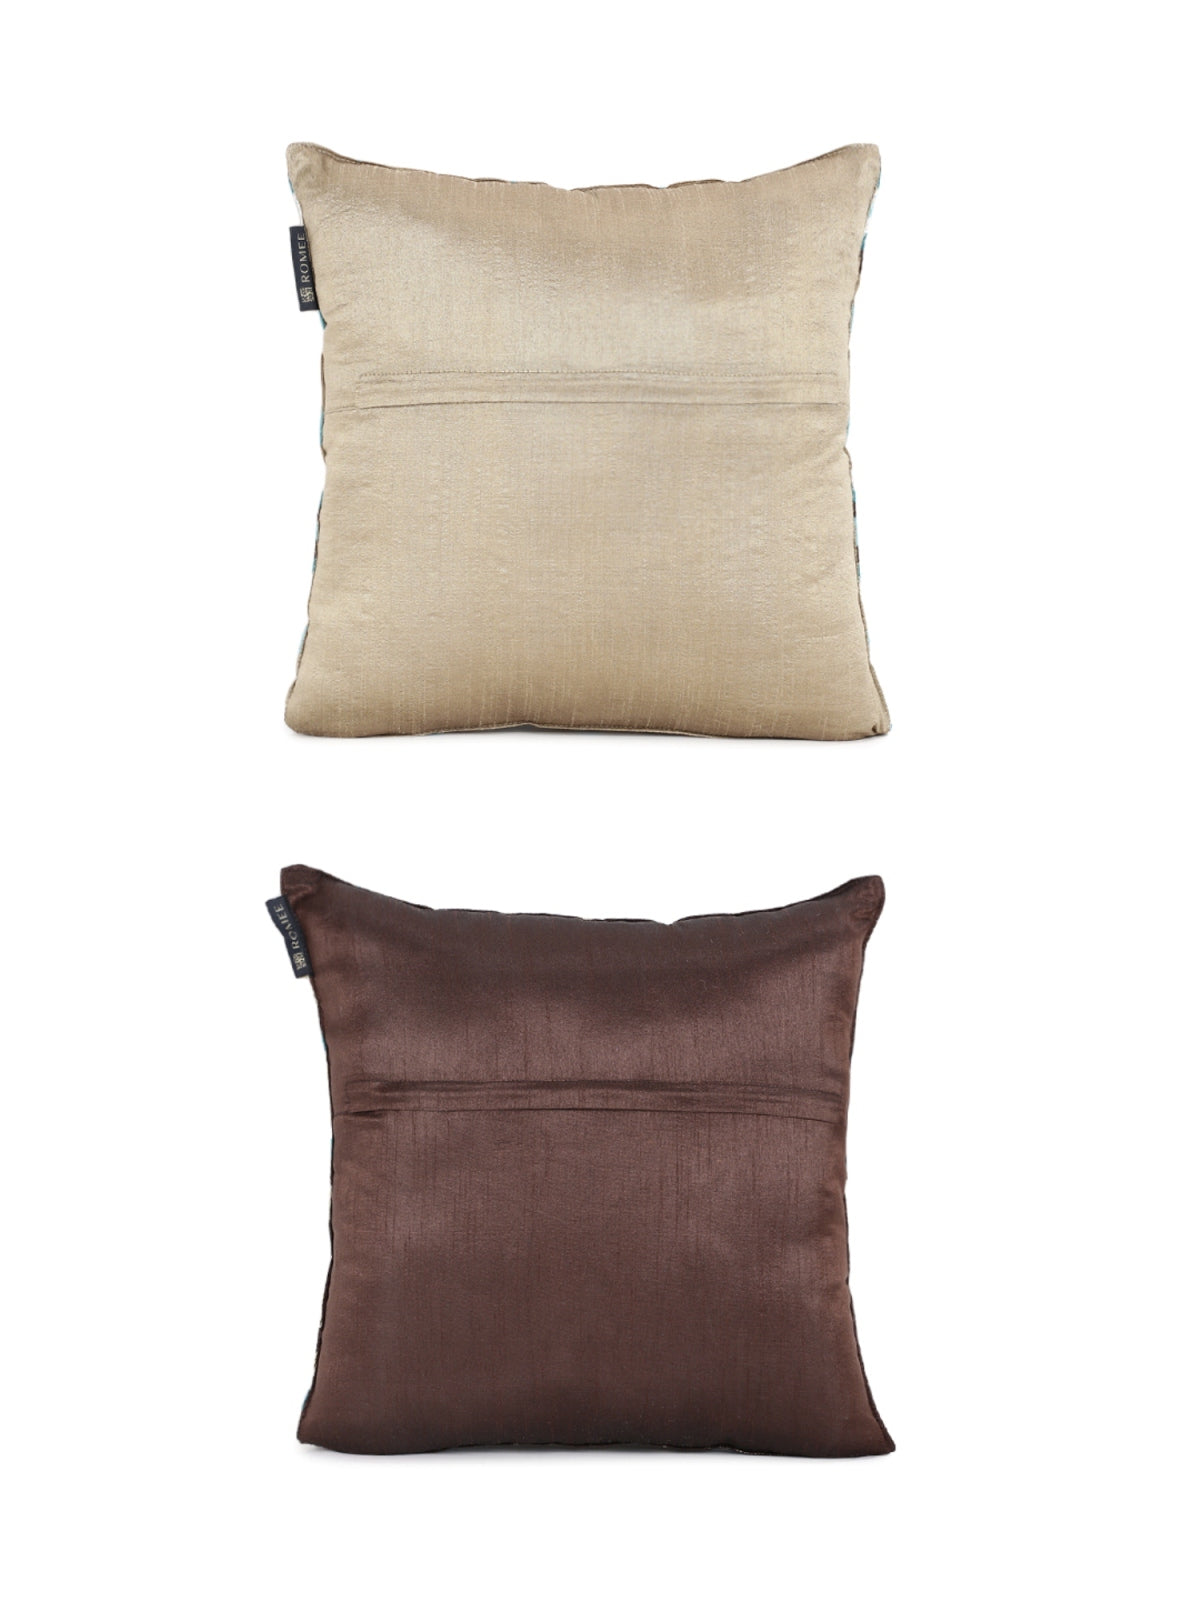 Brown & Beige Set of 2 Polyester 16 Inch x 16 Inch Cushion Covers